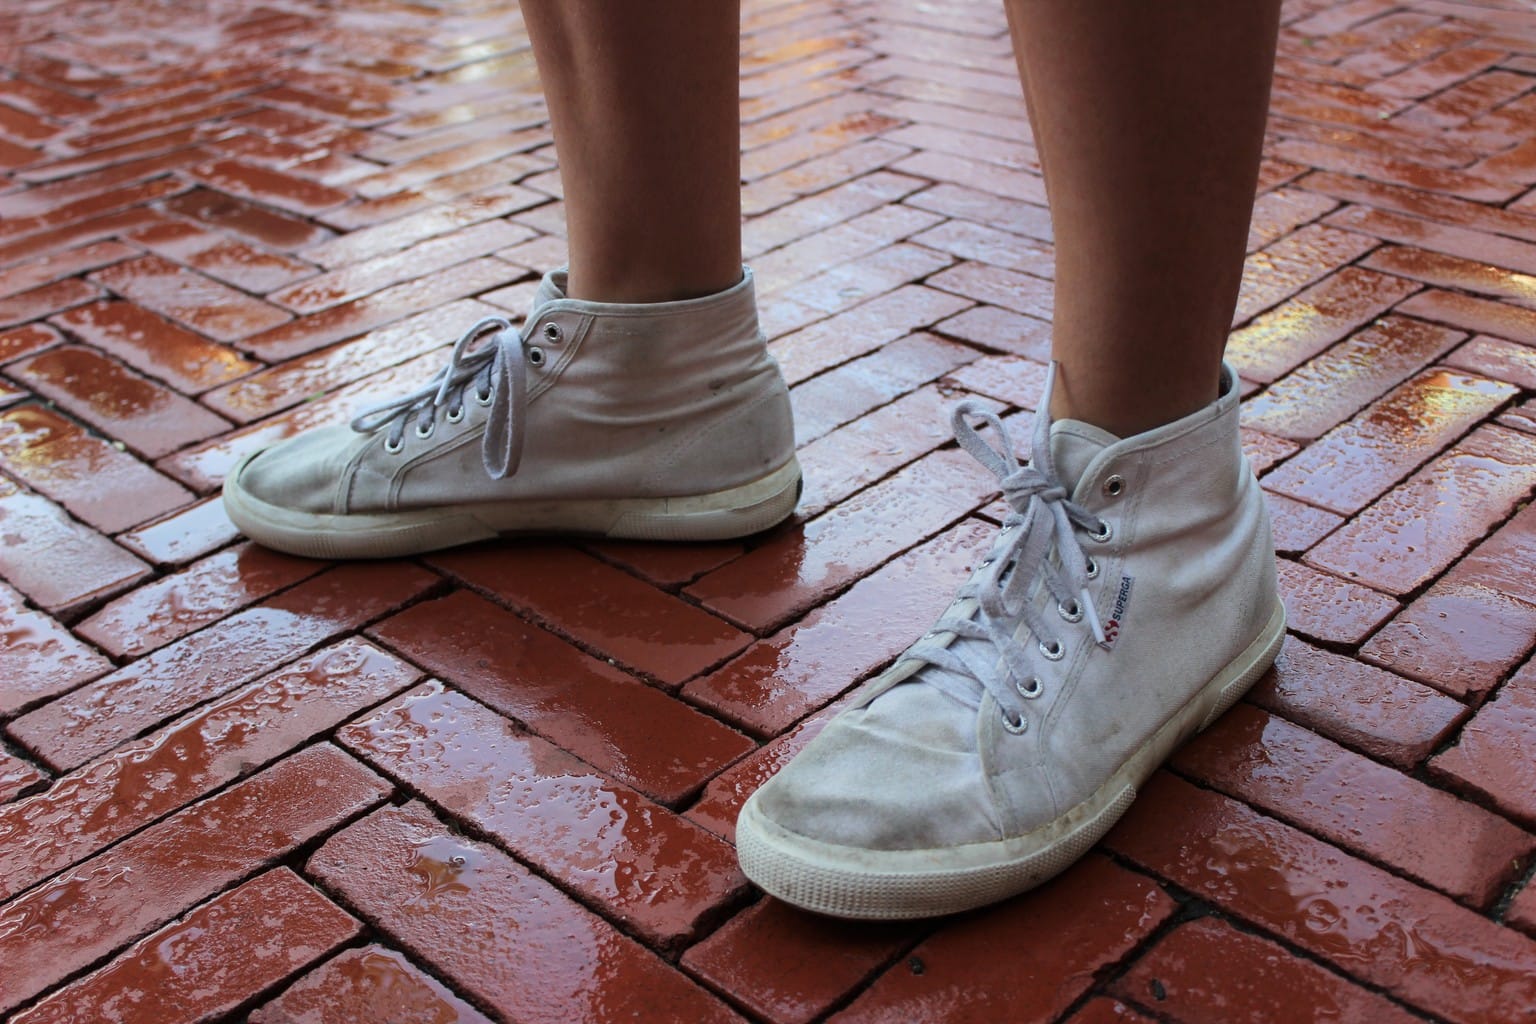 White high-top lace-up sneakers with rubber soles.